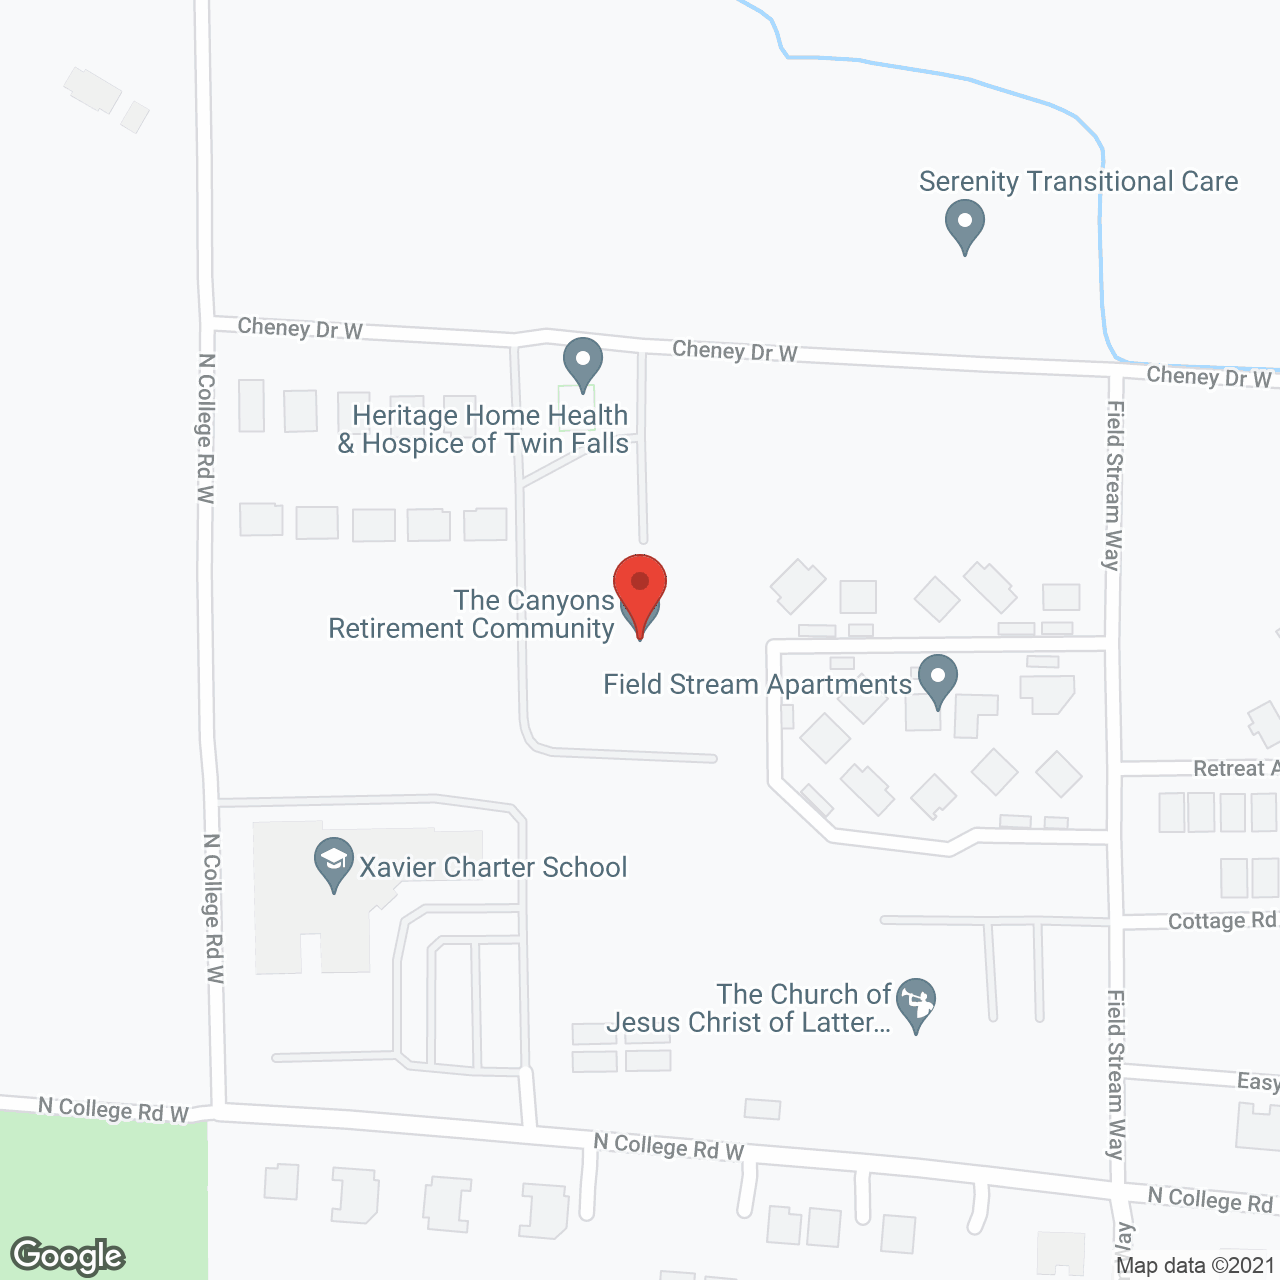 Canyons Retirement Community in google map